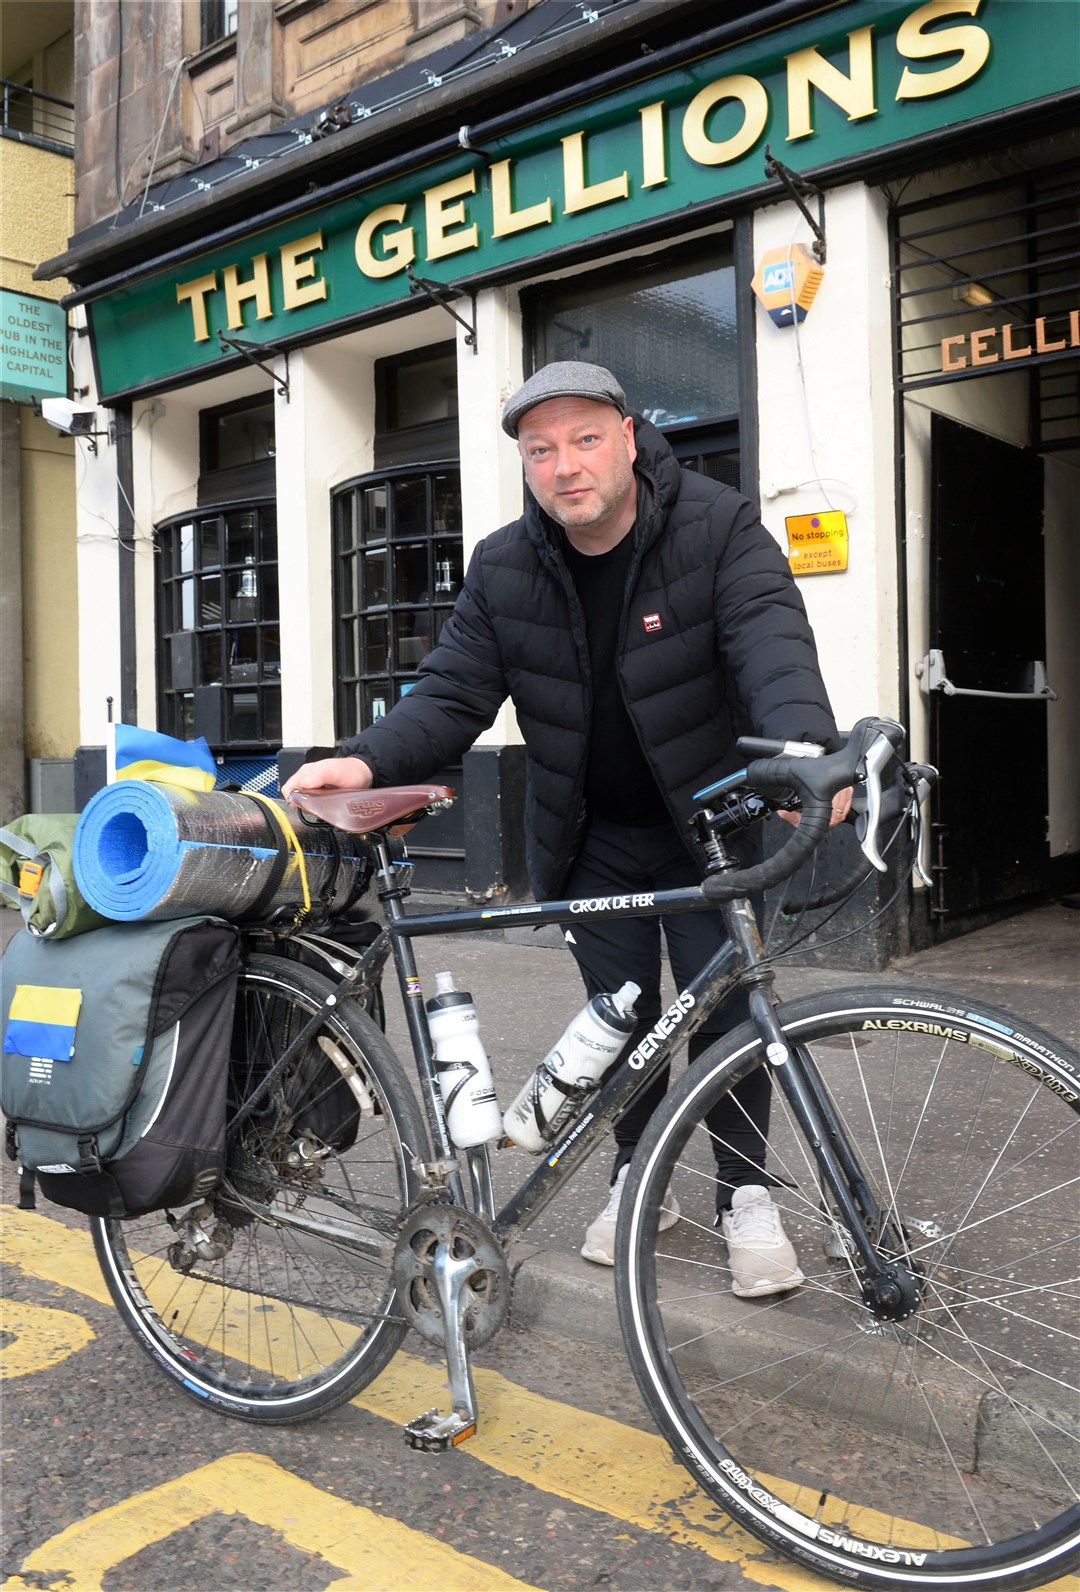 Alasdair Fraser before setting of his Gdansk to The Gellions fundraising cycle roadtrip for Urkraine.Picture: Gary Anthony